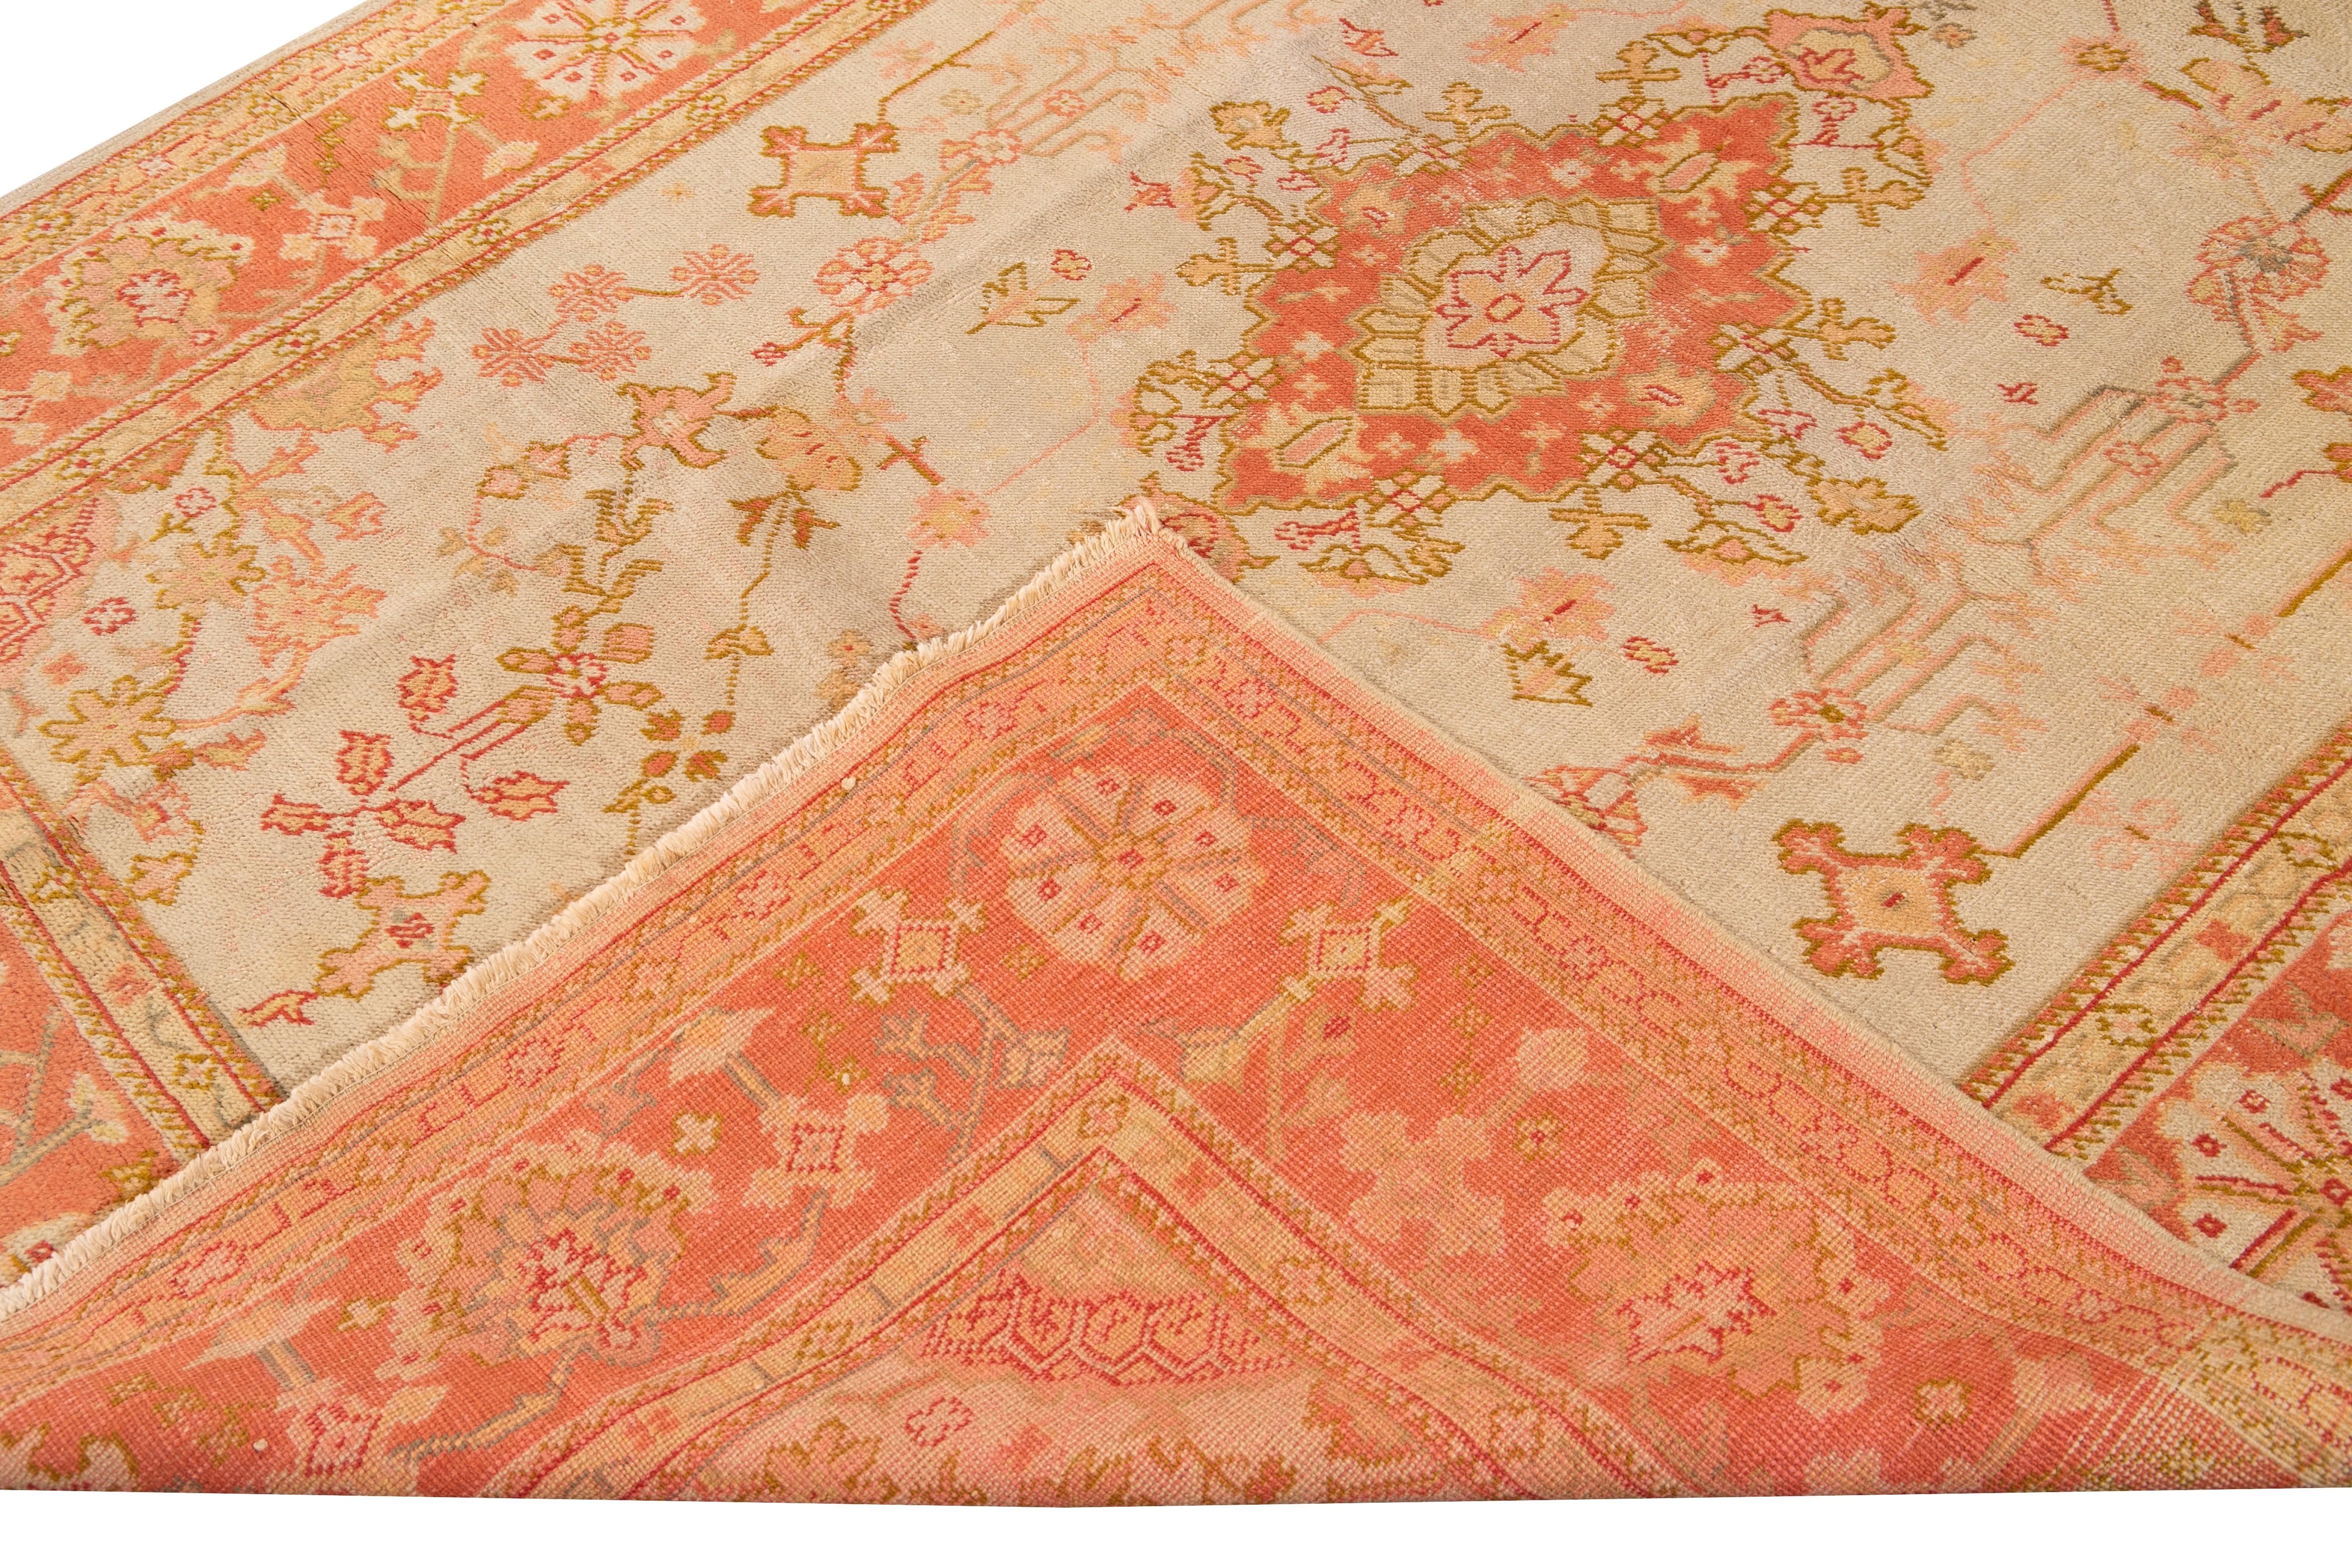 Beautiful antique Turkish Oushak hand knotted wool rug with peach and beige field. This Oushak rug has a frame of peach, pink, and yellow accents in a gorgeous all-over center medallion floral design.

This rug measures: 6'10